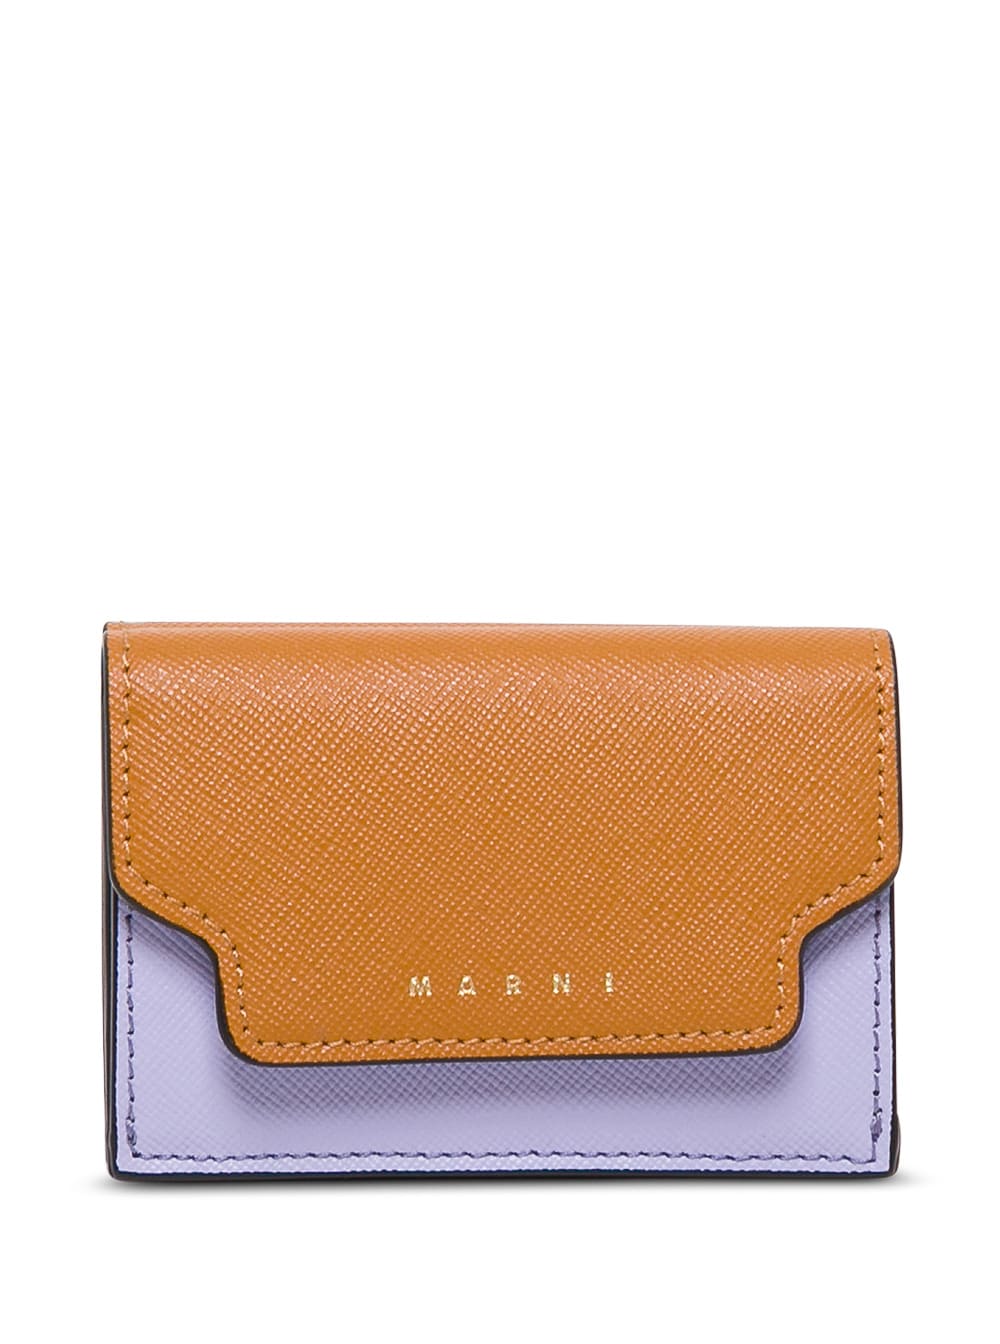 Marni Bicolor Leather Wallet With Logo